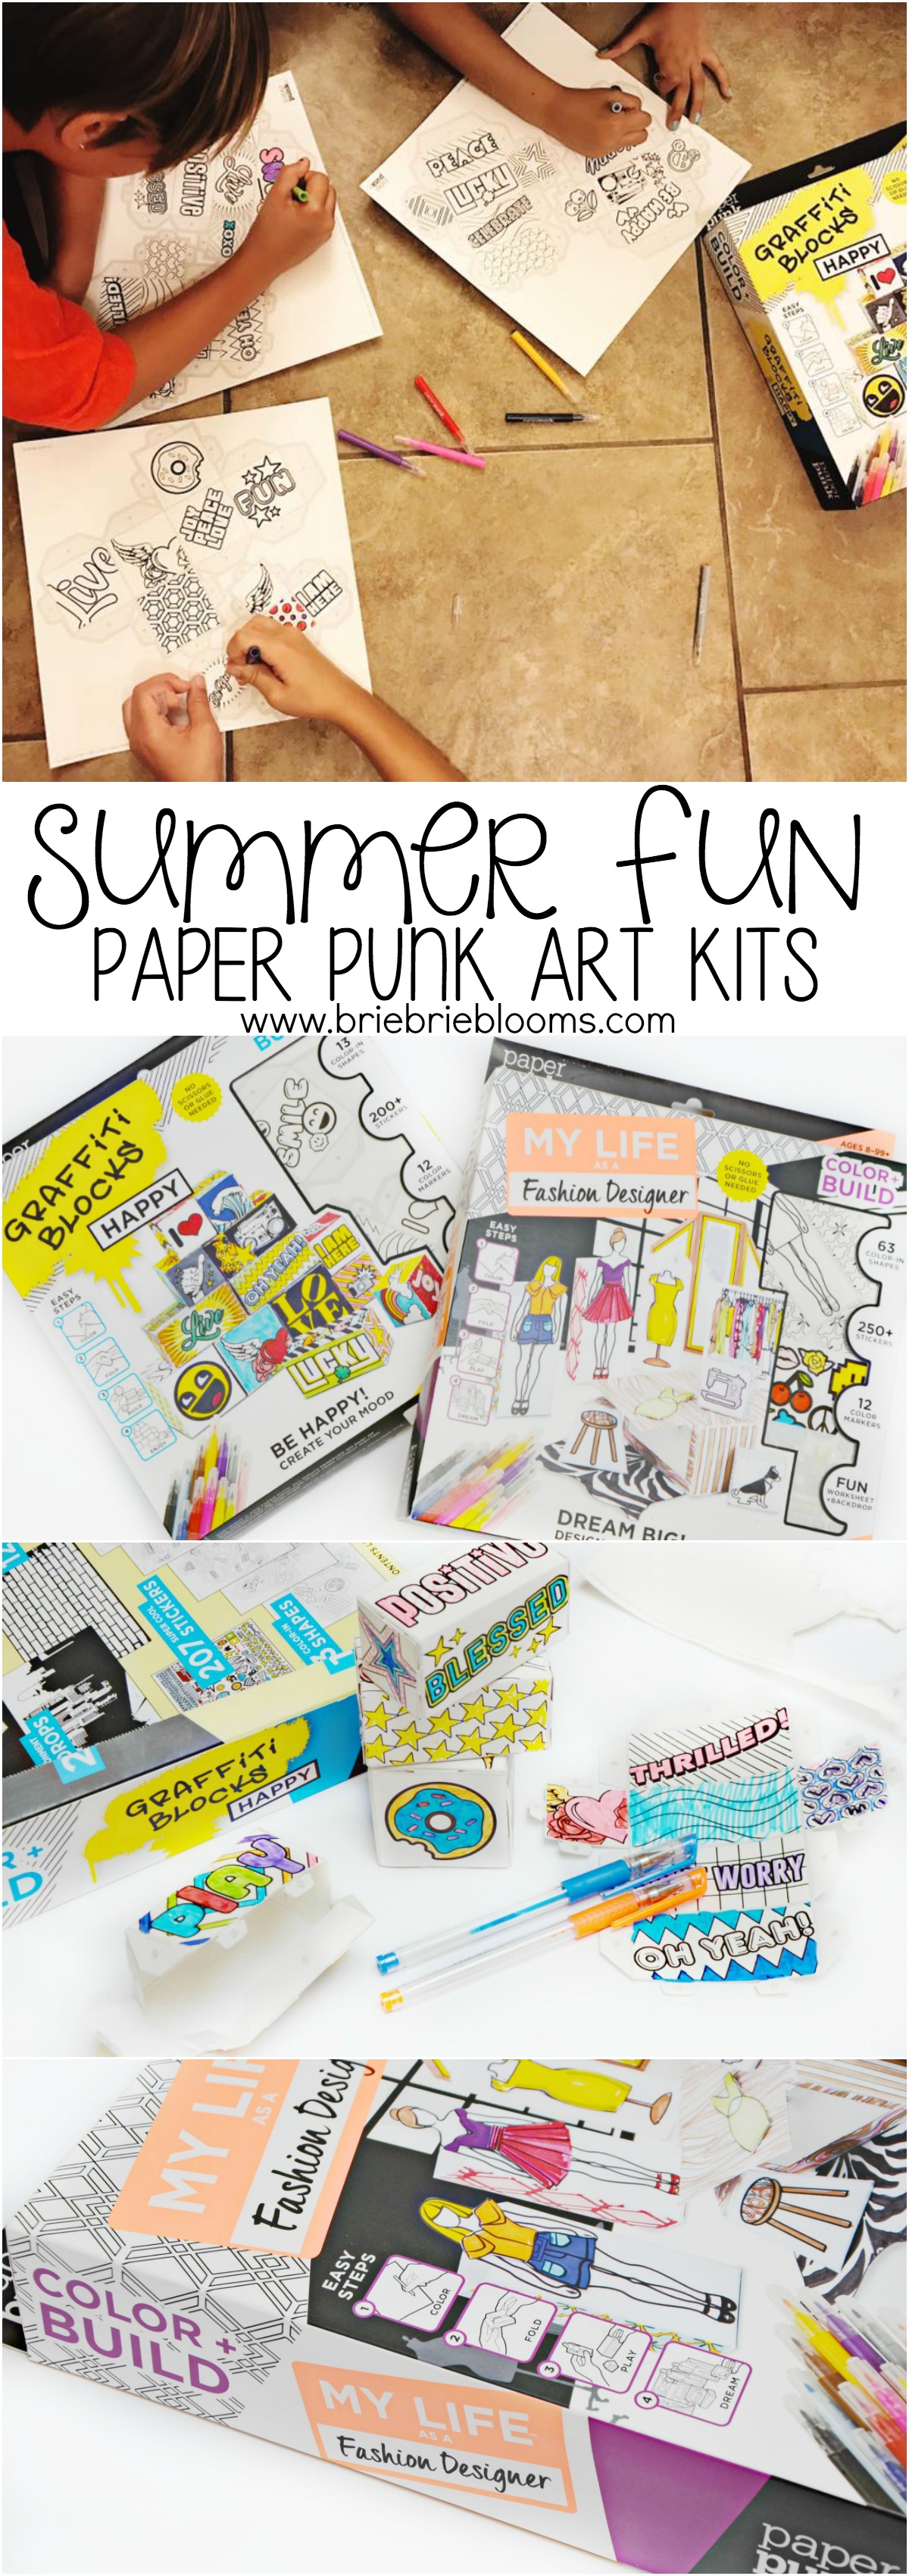 Paper Punk® art kits are my go to activity for summer fun on my busiest work from home days. My daughters love the creative hands on activities.